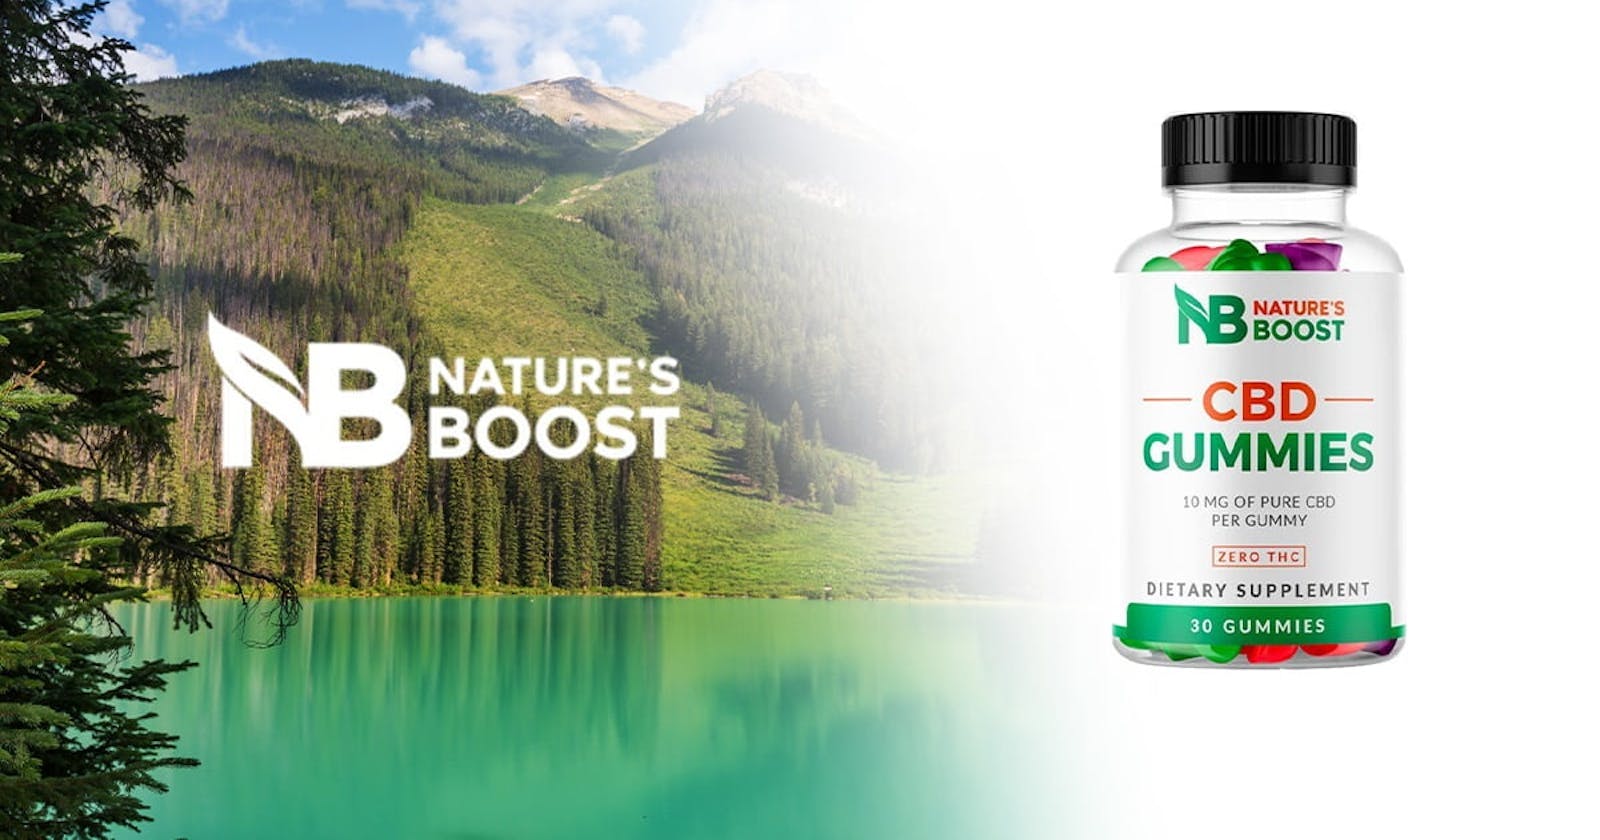 NB Natures Boost CBD Gummies These are referred to as a herbal fitness-booster.